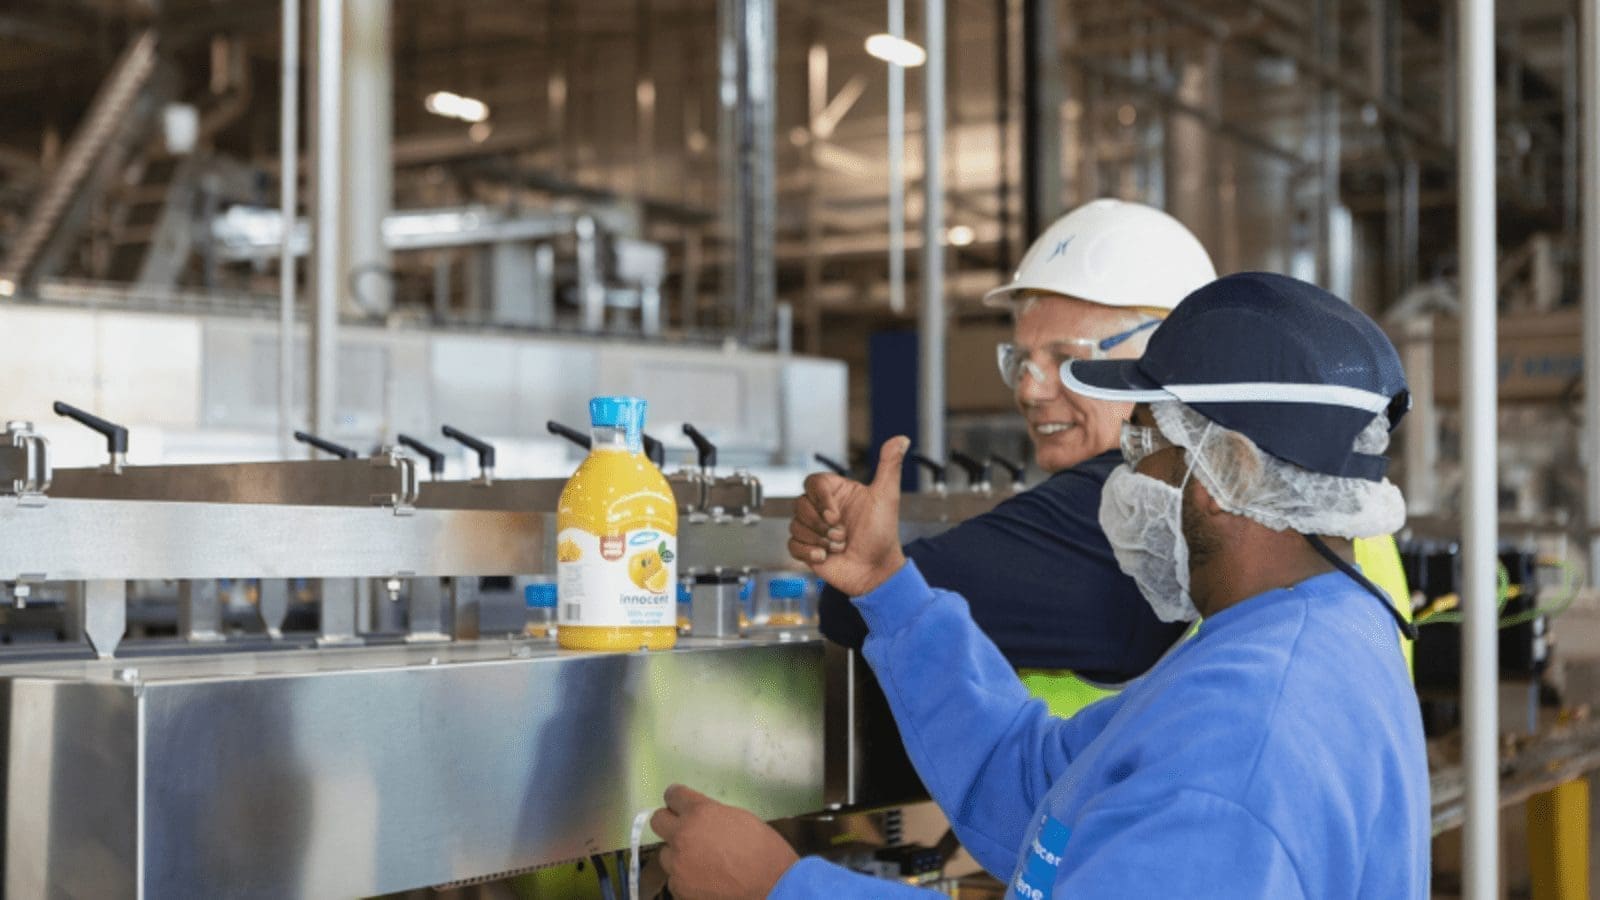 Coca-cola owned Innocent Drinks invests US$260m in new carbon-neutral juice factory